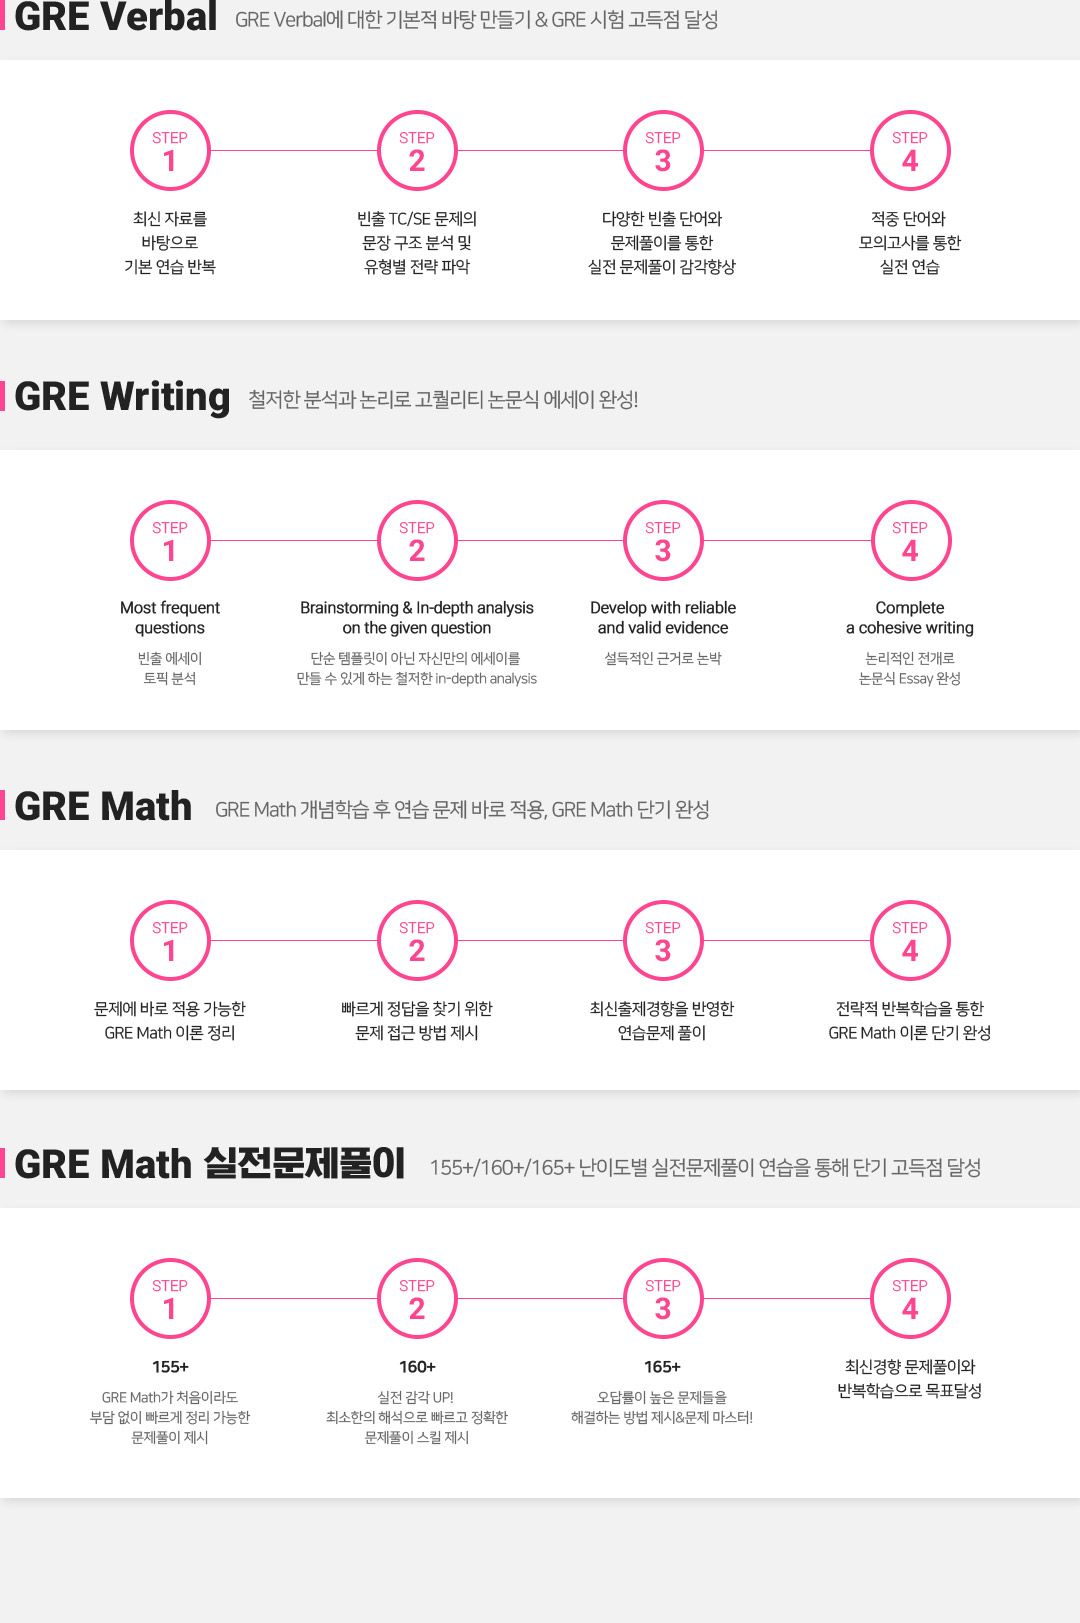 GRE Verval, GRE Writing, GRE Math